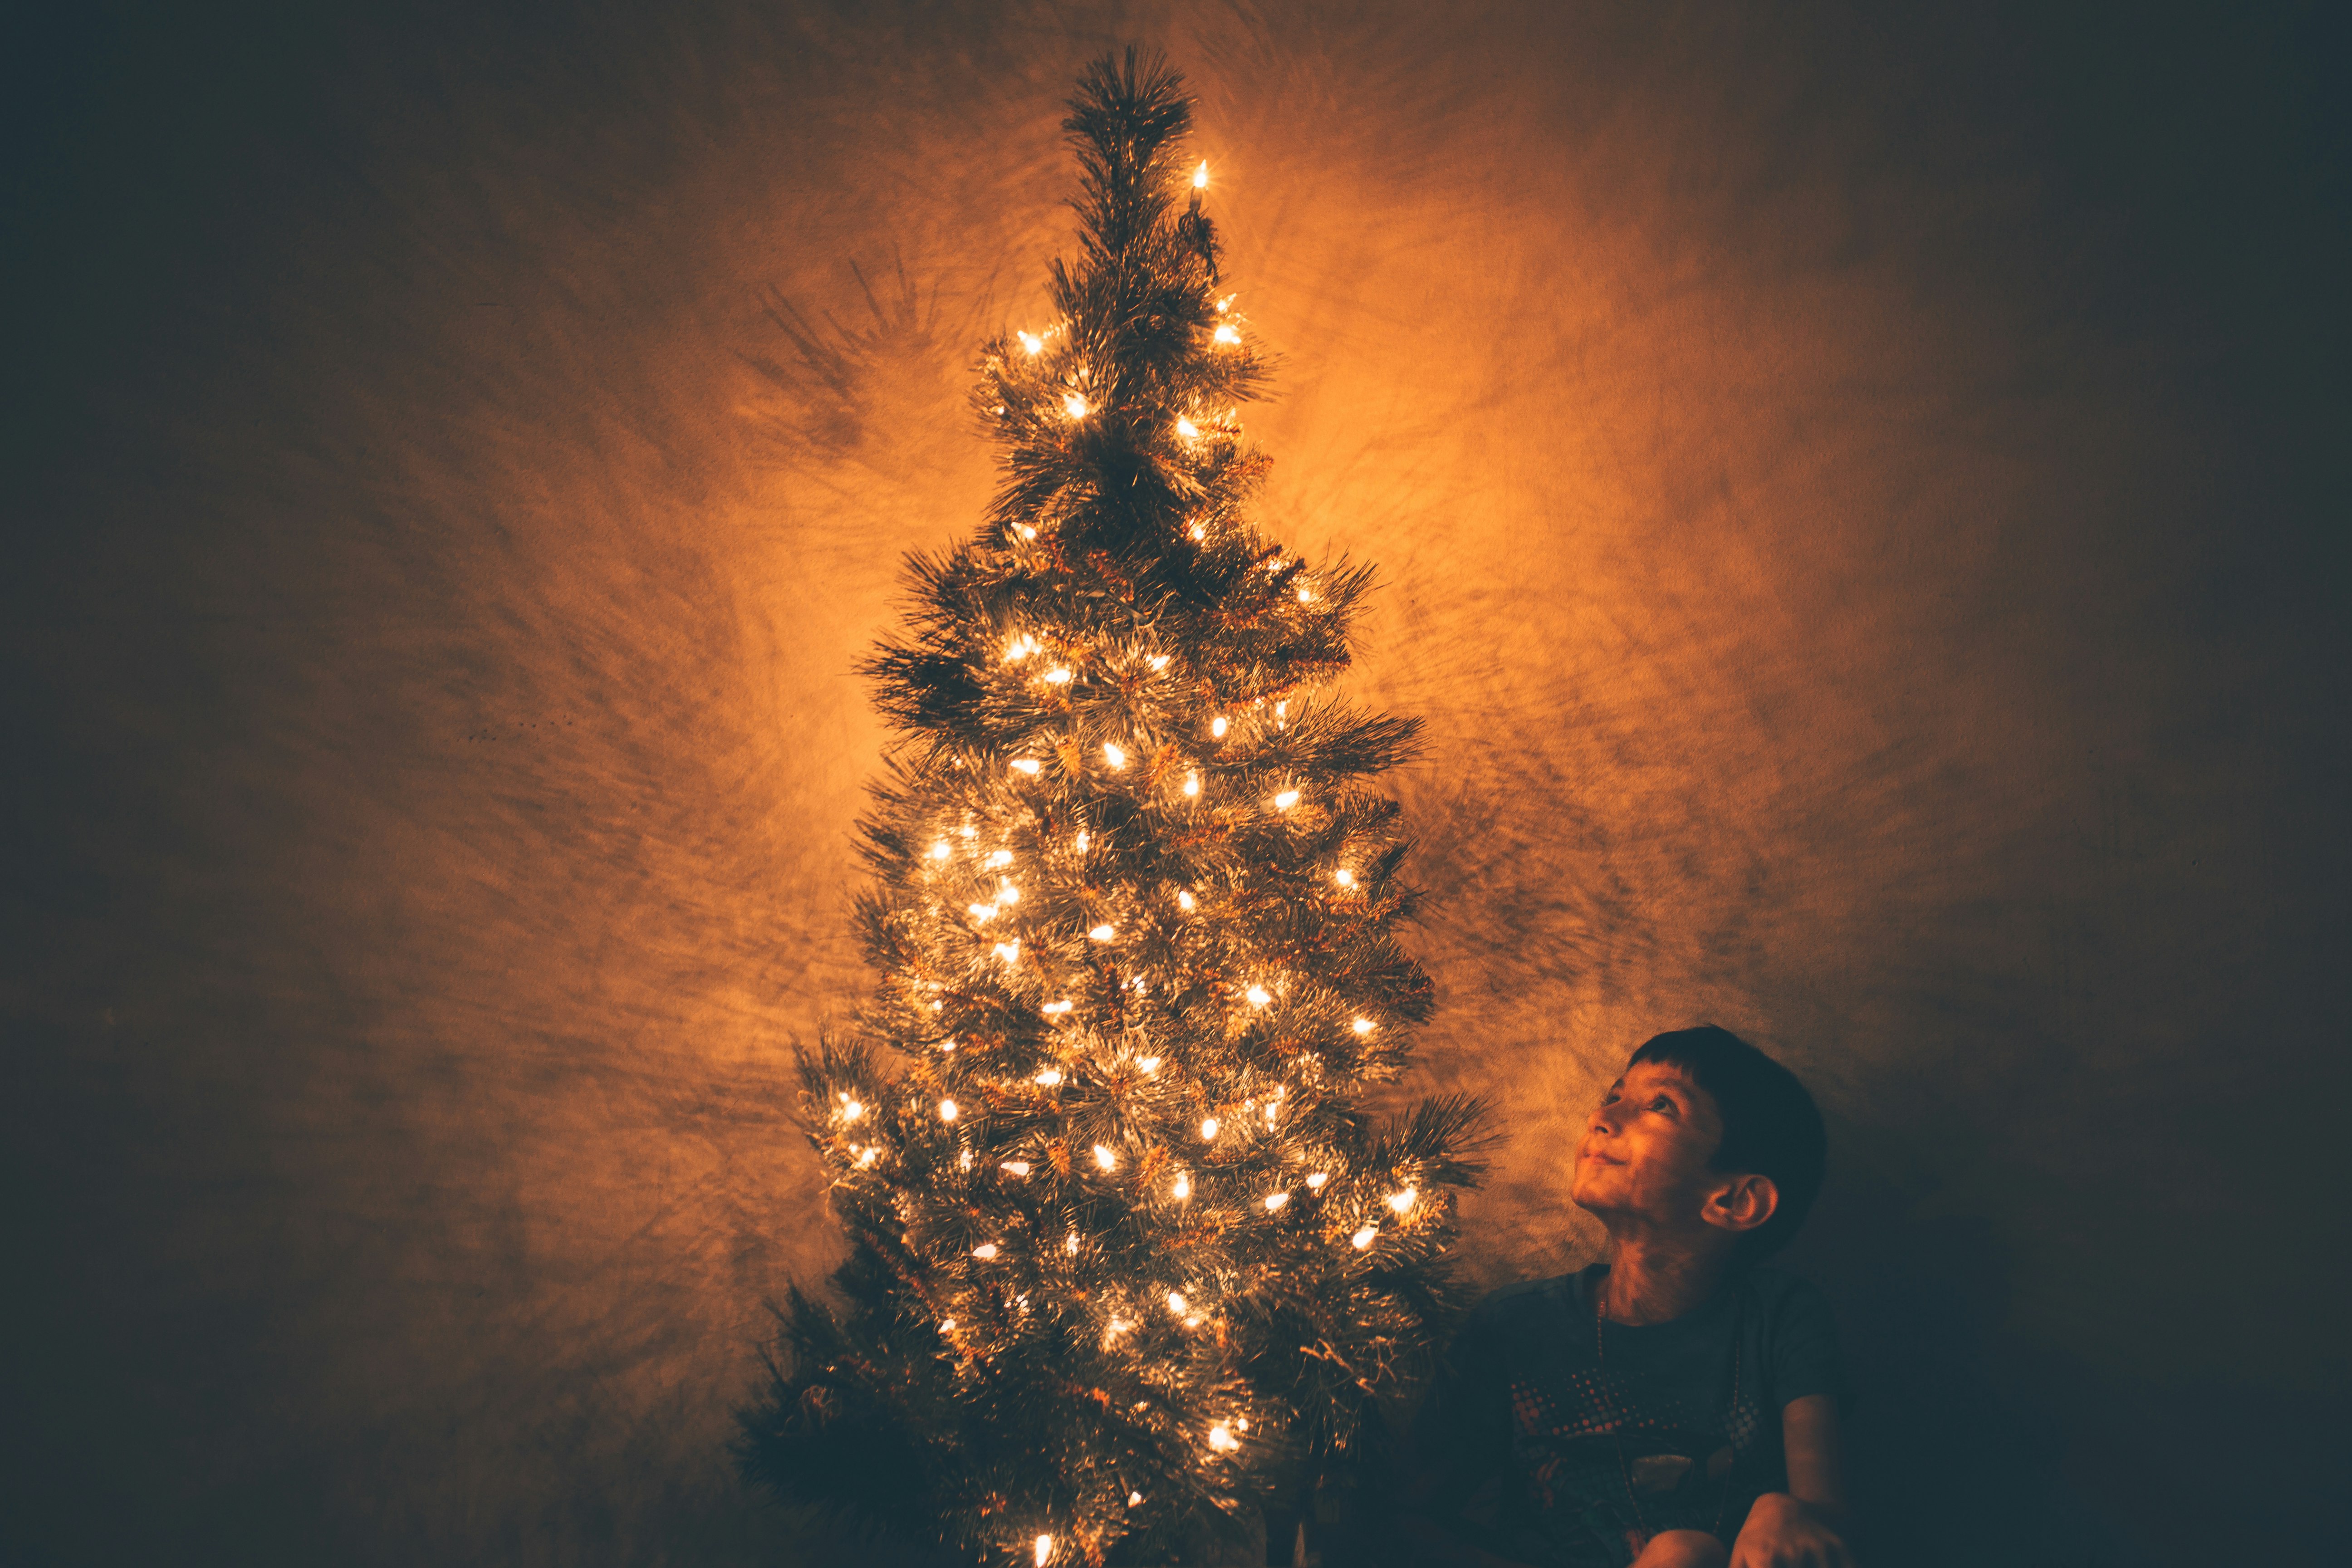 smiling boy beside Christmas tree with lighted string lights